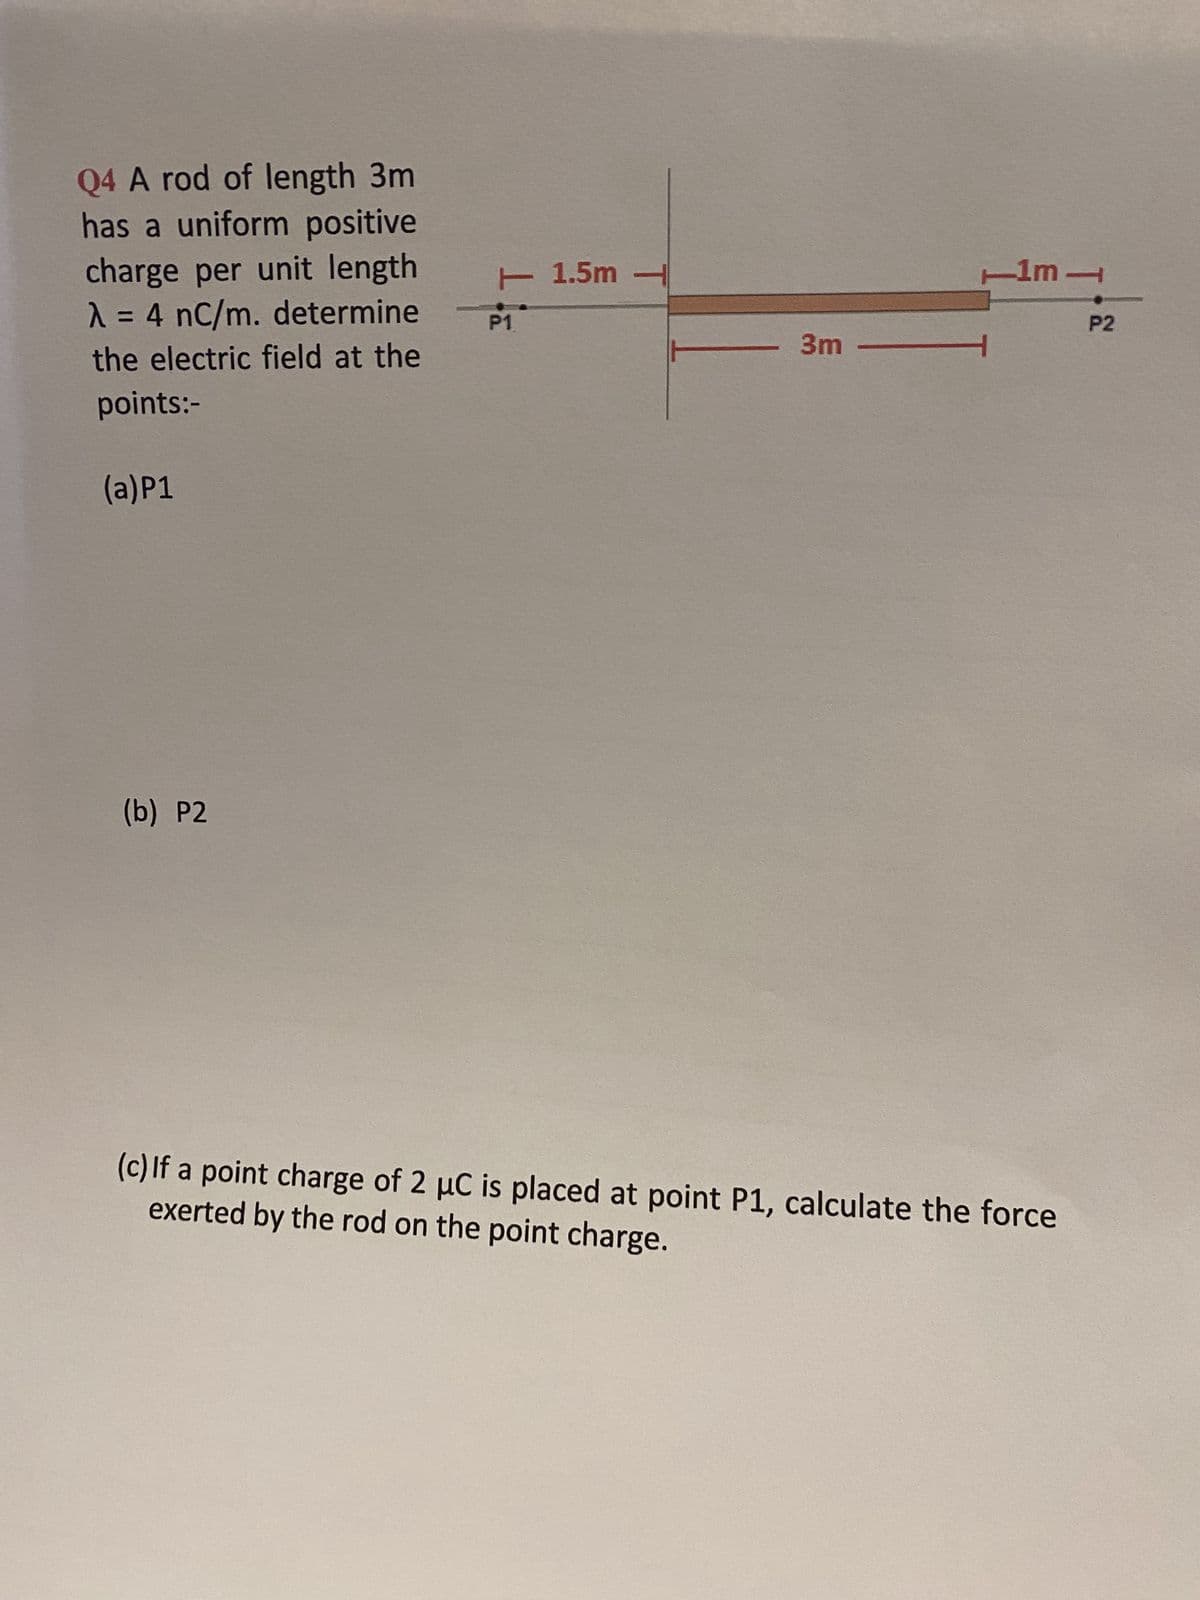 Q4 A rod of length 3m
has a uniform positive
charge per unit length
λ = 4 nC/m. determine
the electric field at the
points:-
(a) P1
3m - 1
(b) P2
(c) If a point charge of 2 µC is placed at point P1, calculate the force
exerted by the rod on the point charge.
- 1.5m -
P1
1m
P2